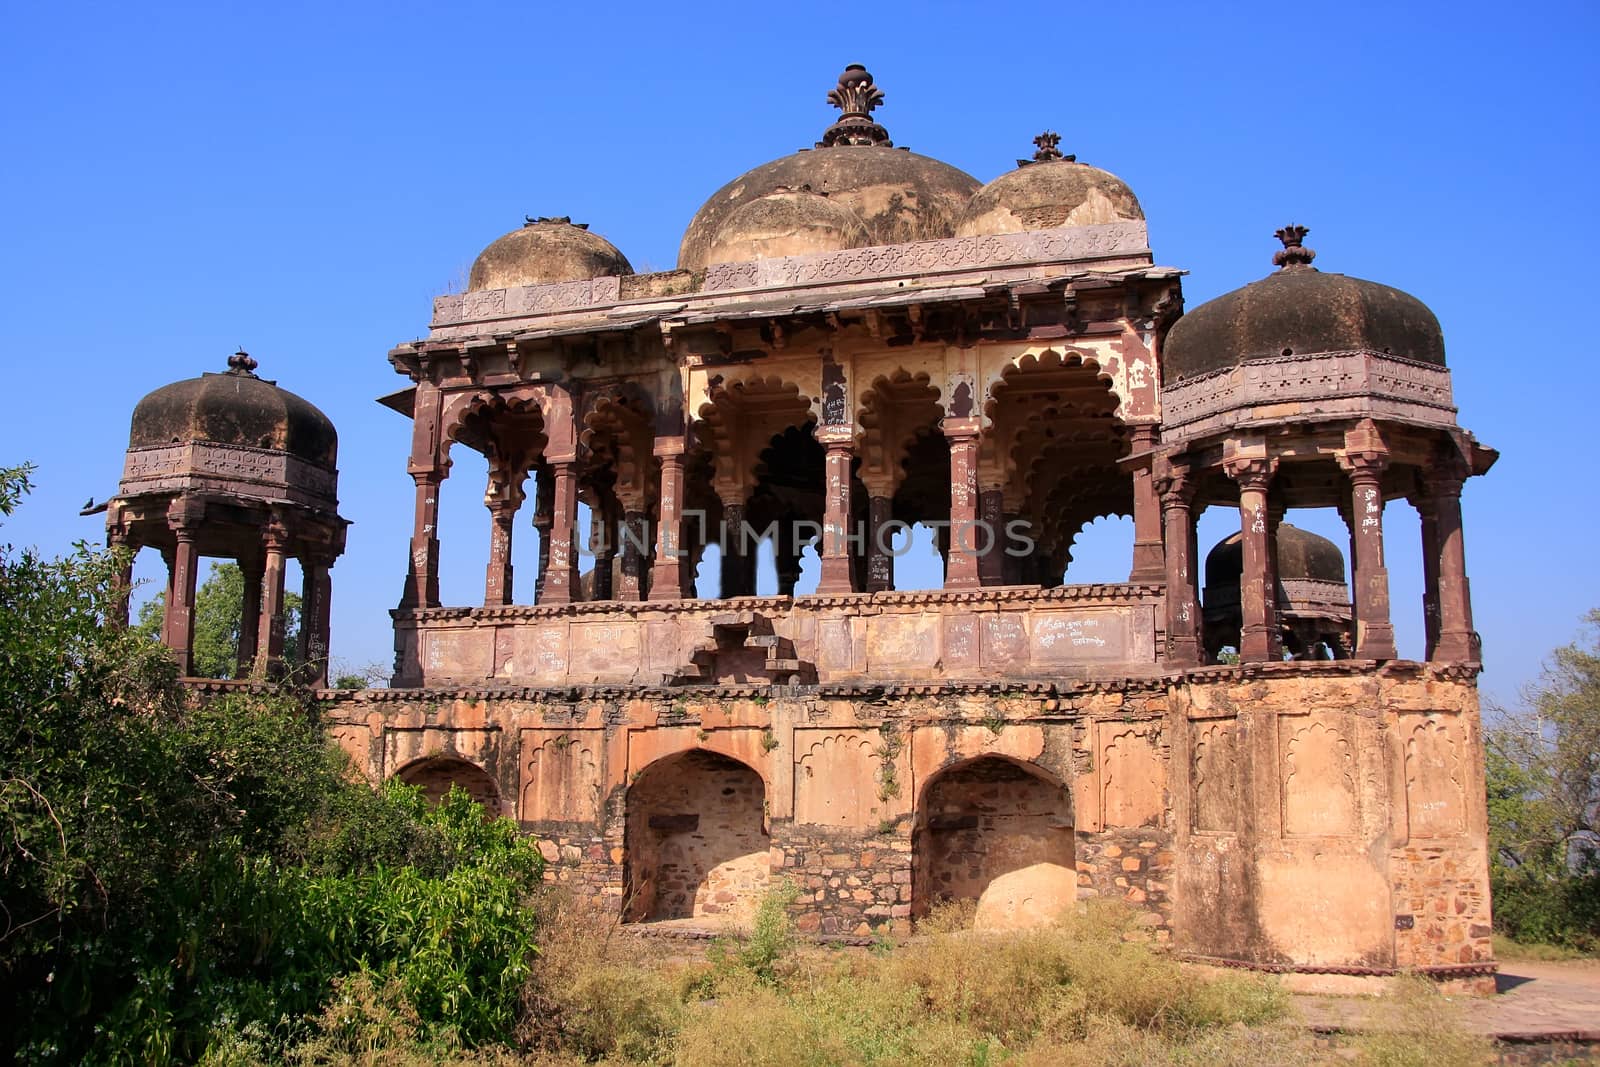 Arched temple at Ranthambore Fort, India by donya_nedomam